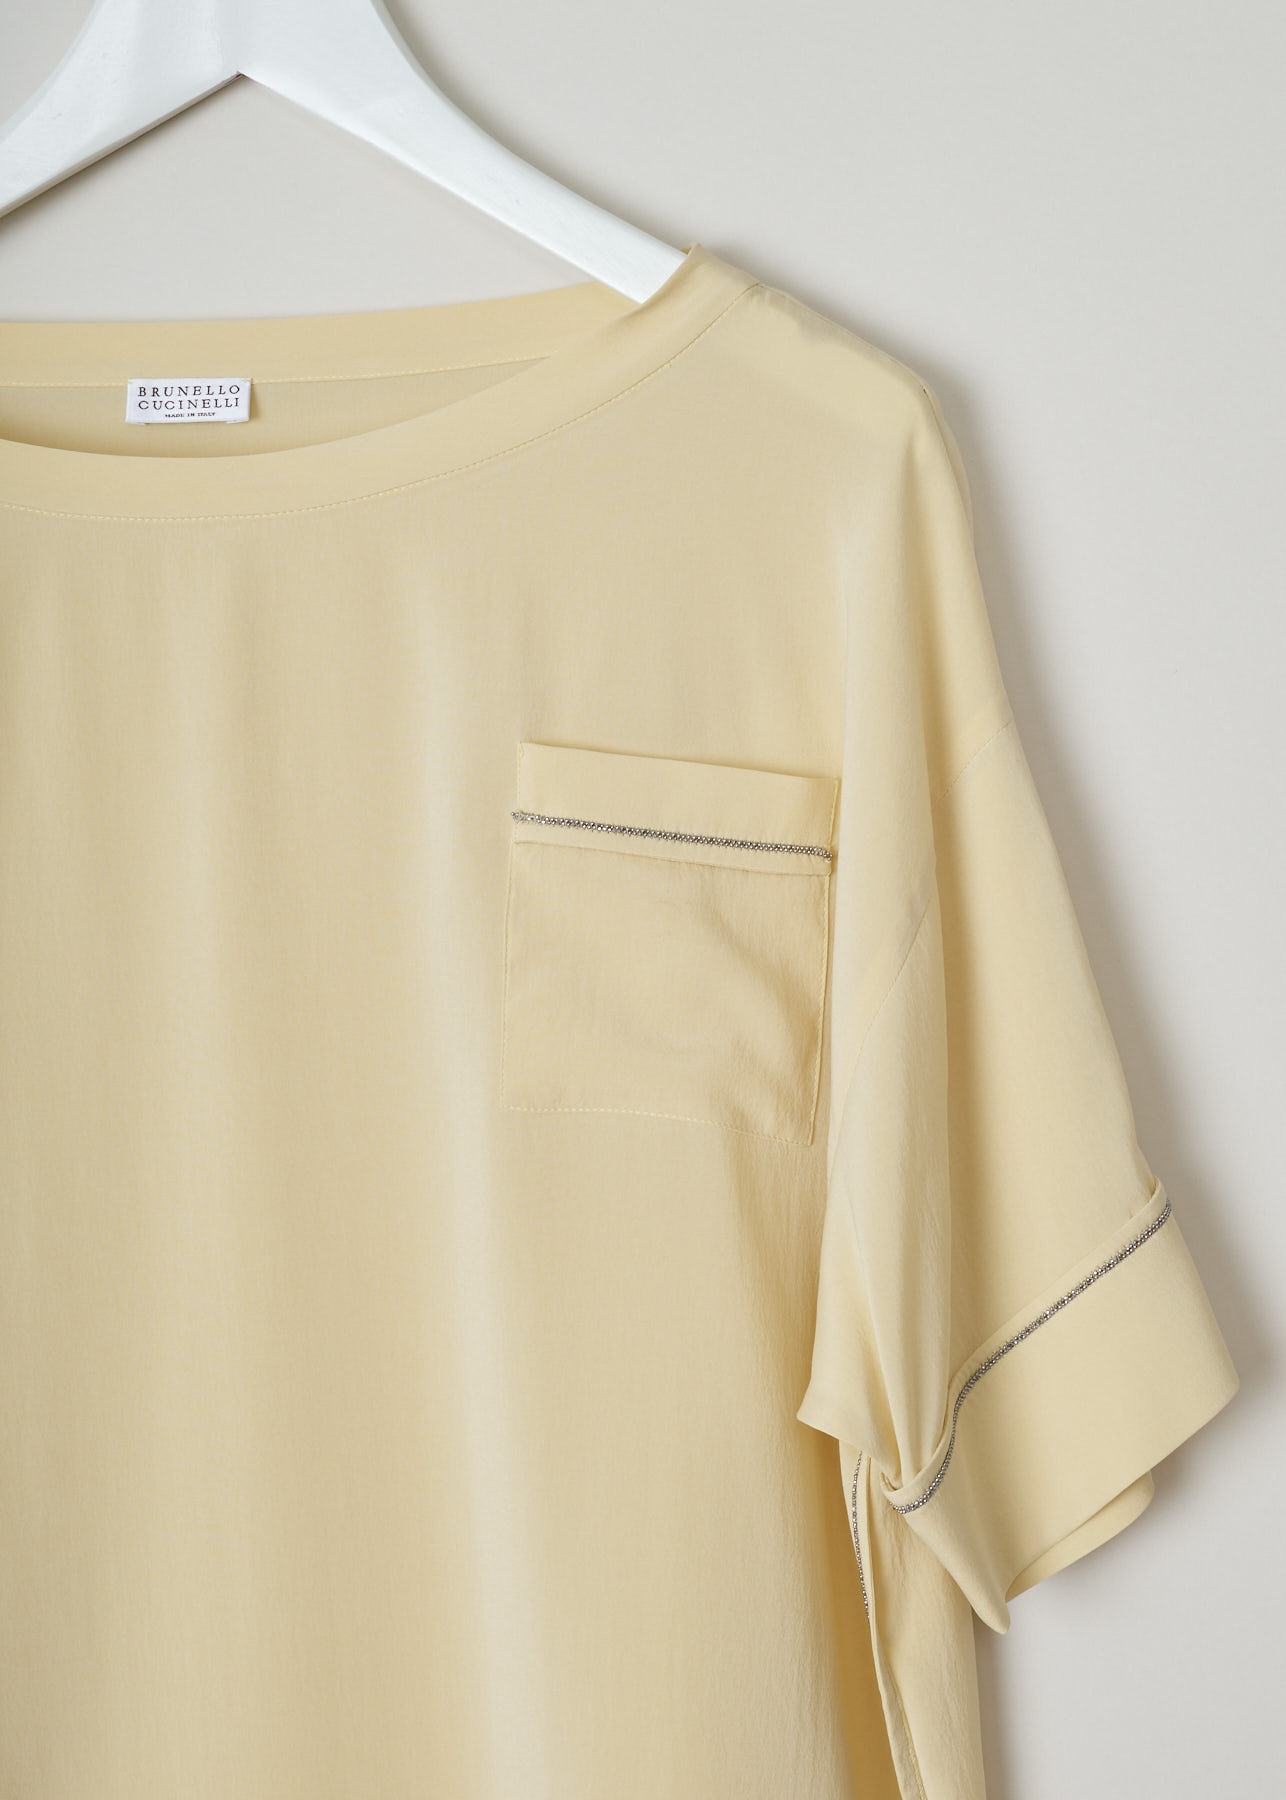 Brunello Cucinelli, 
Silk boxy t-shirt,
M0S28B7108_CF013,front,detail, Oversized fluid silk crepe de Chine t-shirt top. With monili sparkle detail on the left pocket, short sleeves and side seams.